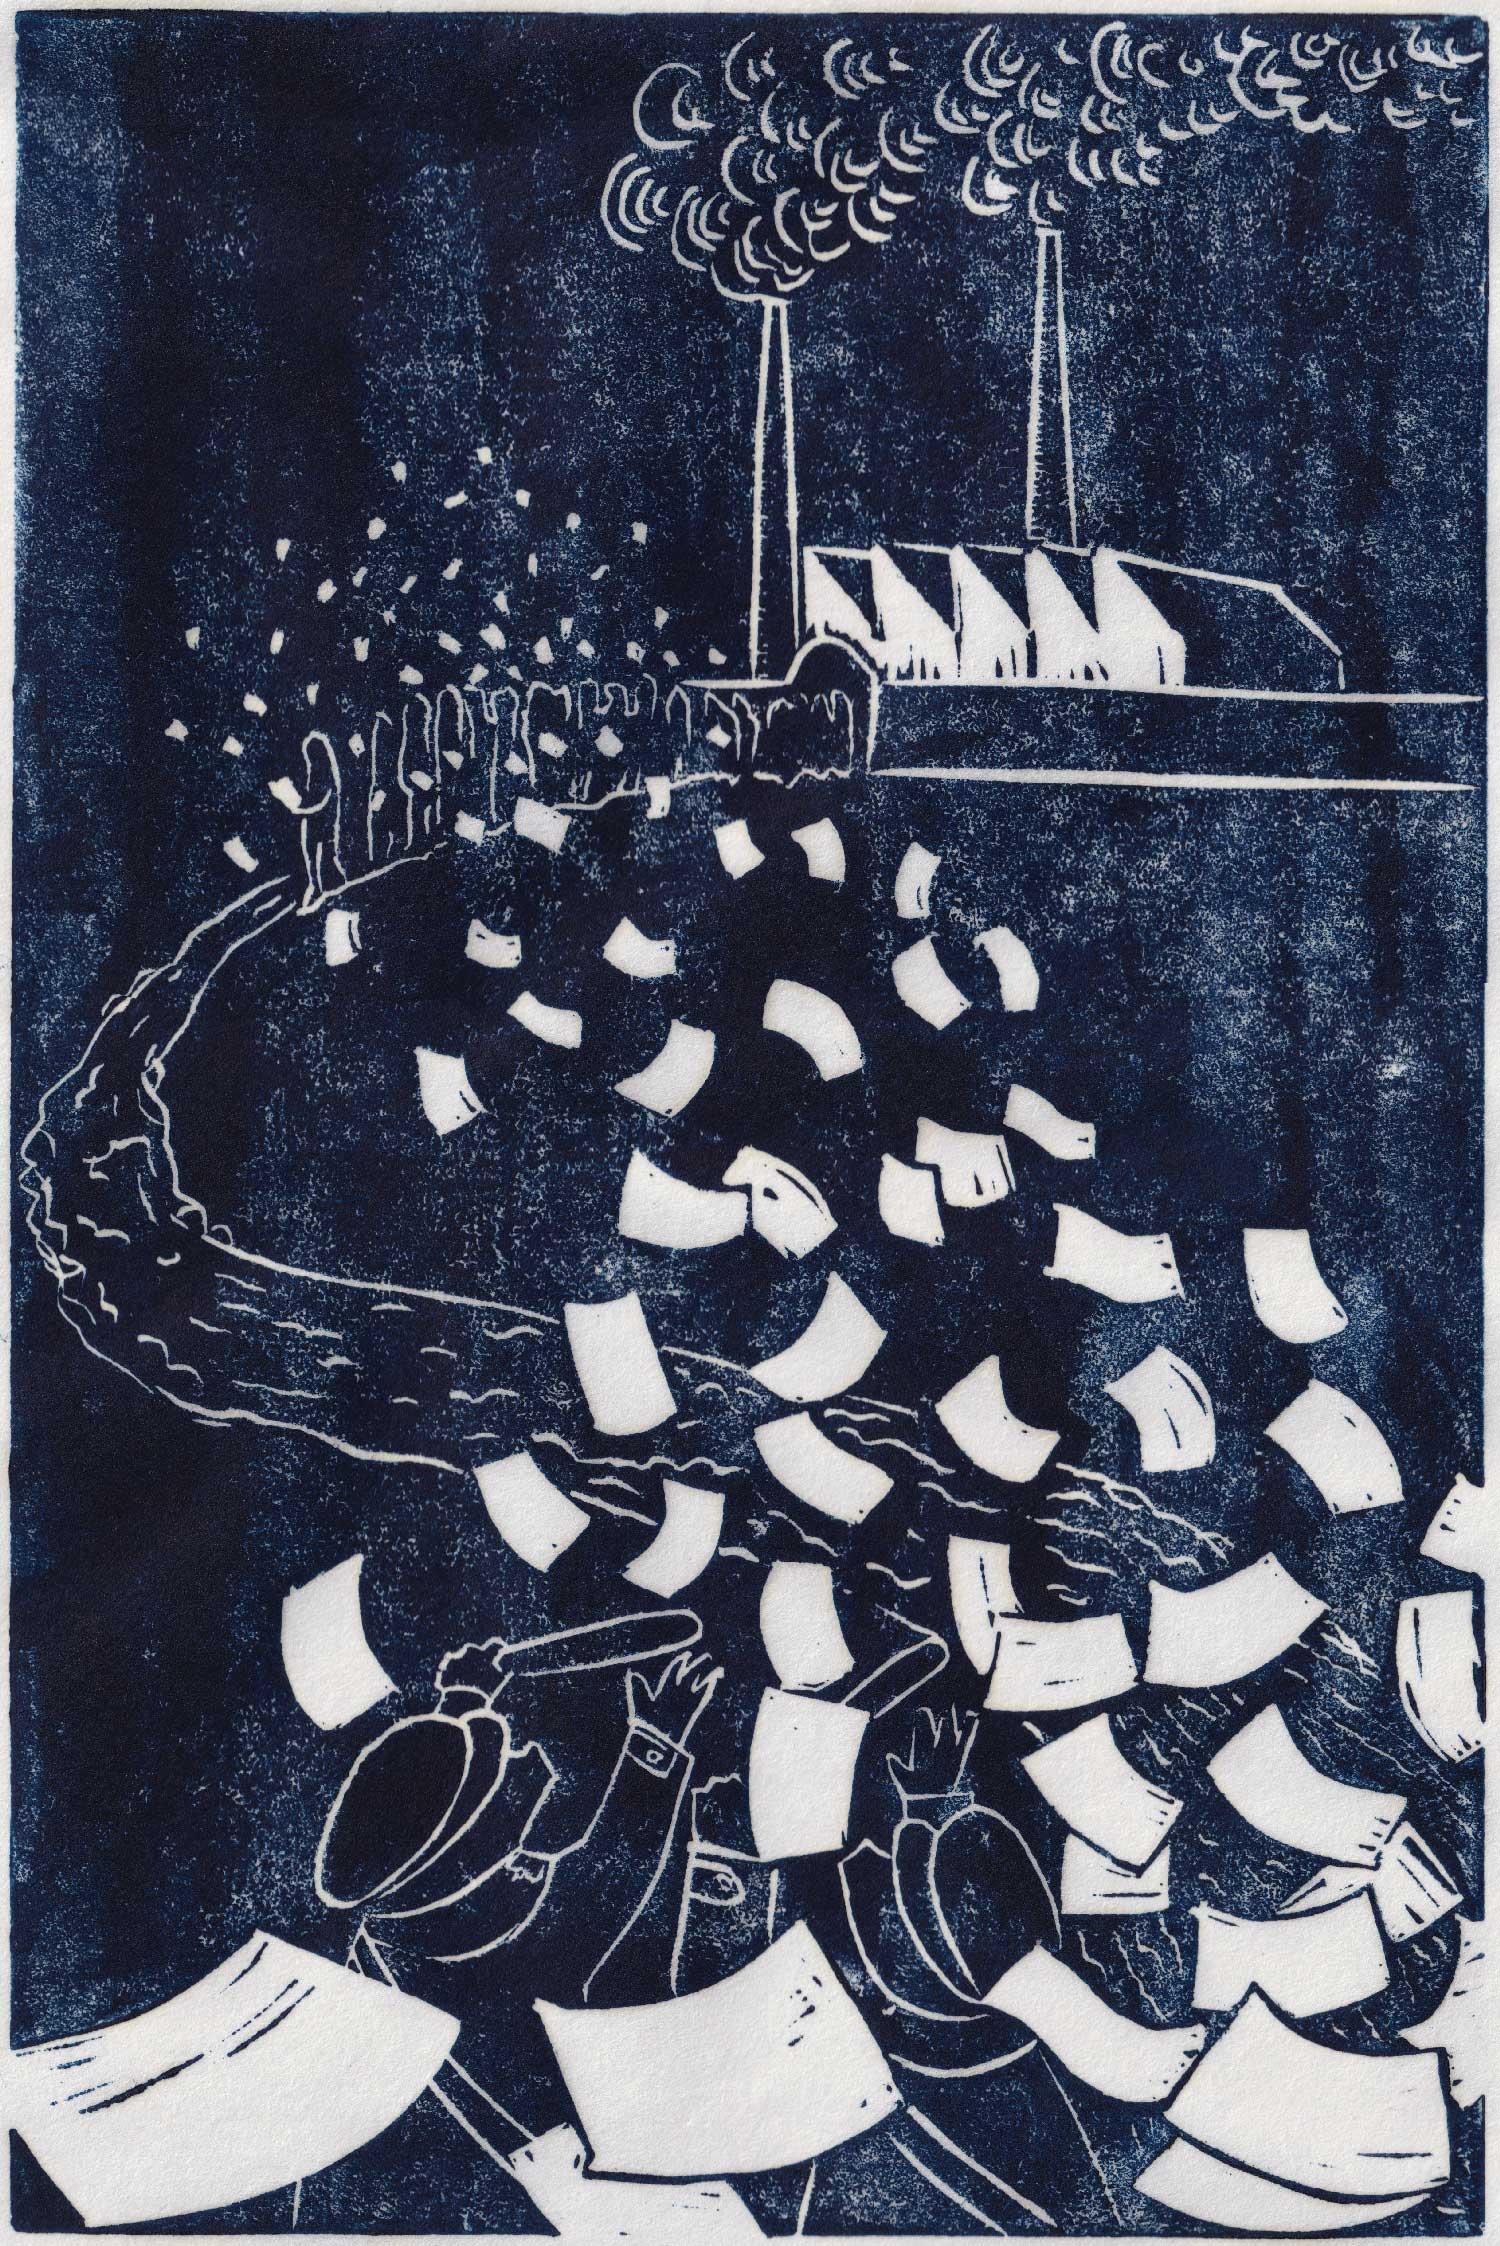 Linocut print titled 'Leaflets' by Minna Henriksson depicting a stream of flying paper leaflets, with a factory and a crowd of presumably factory workers in the background. In the foreground, 2 police-like figures trying to respond to the flying leaflets.